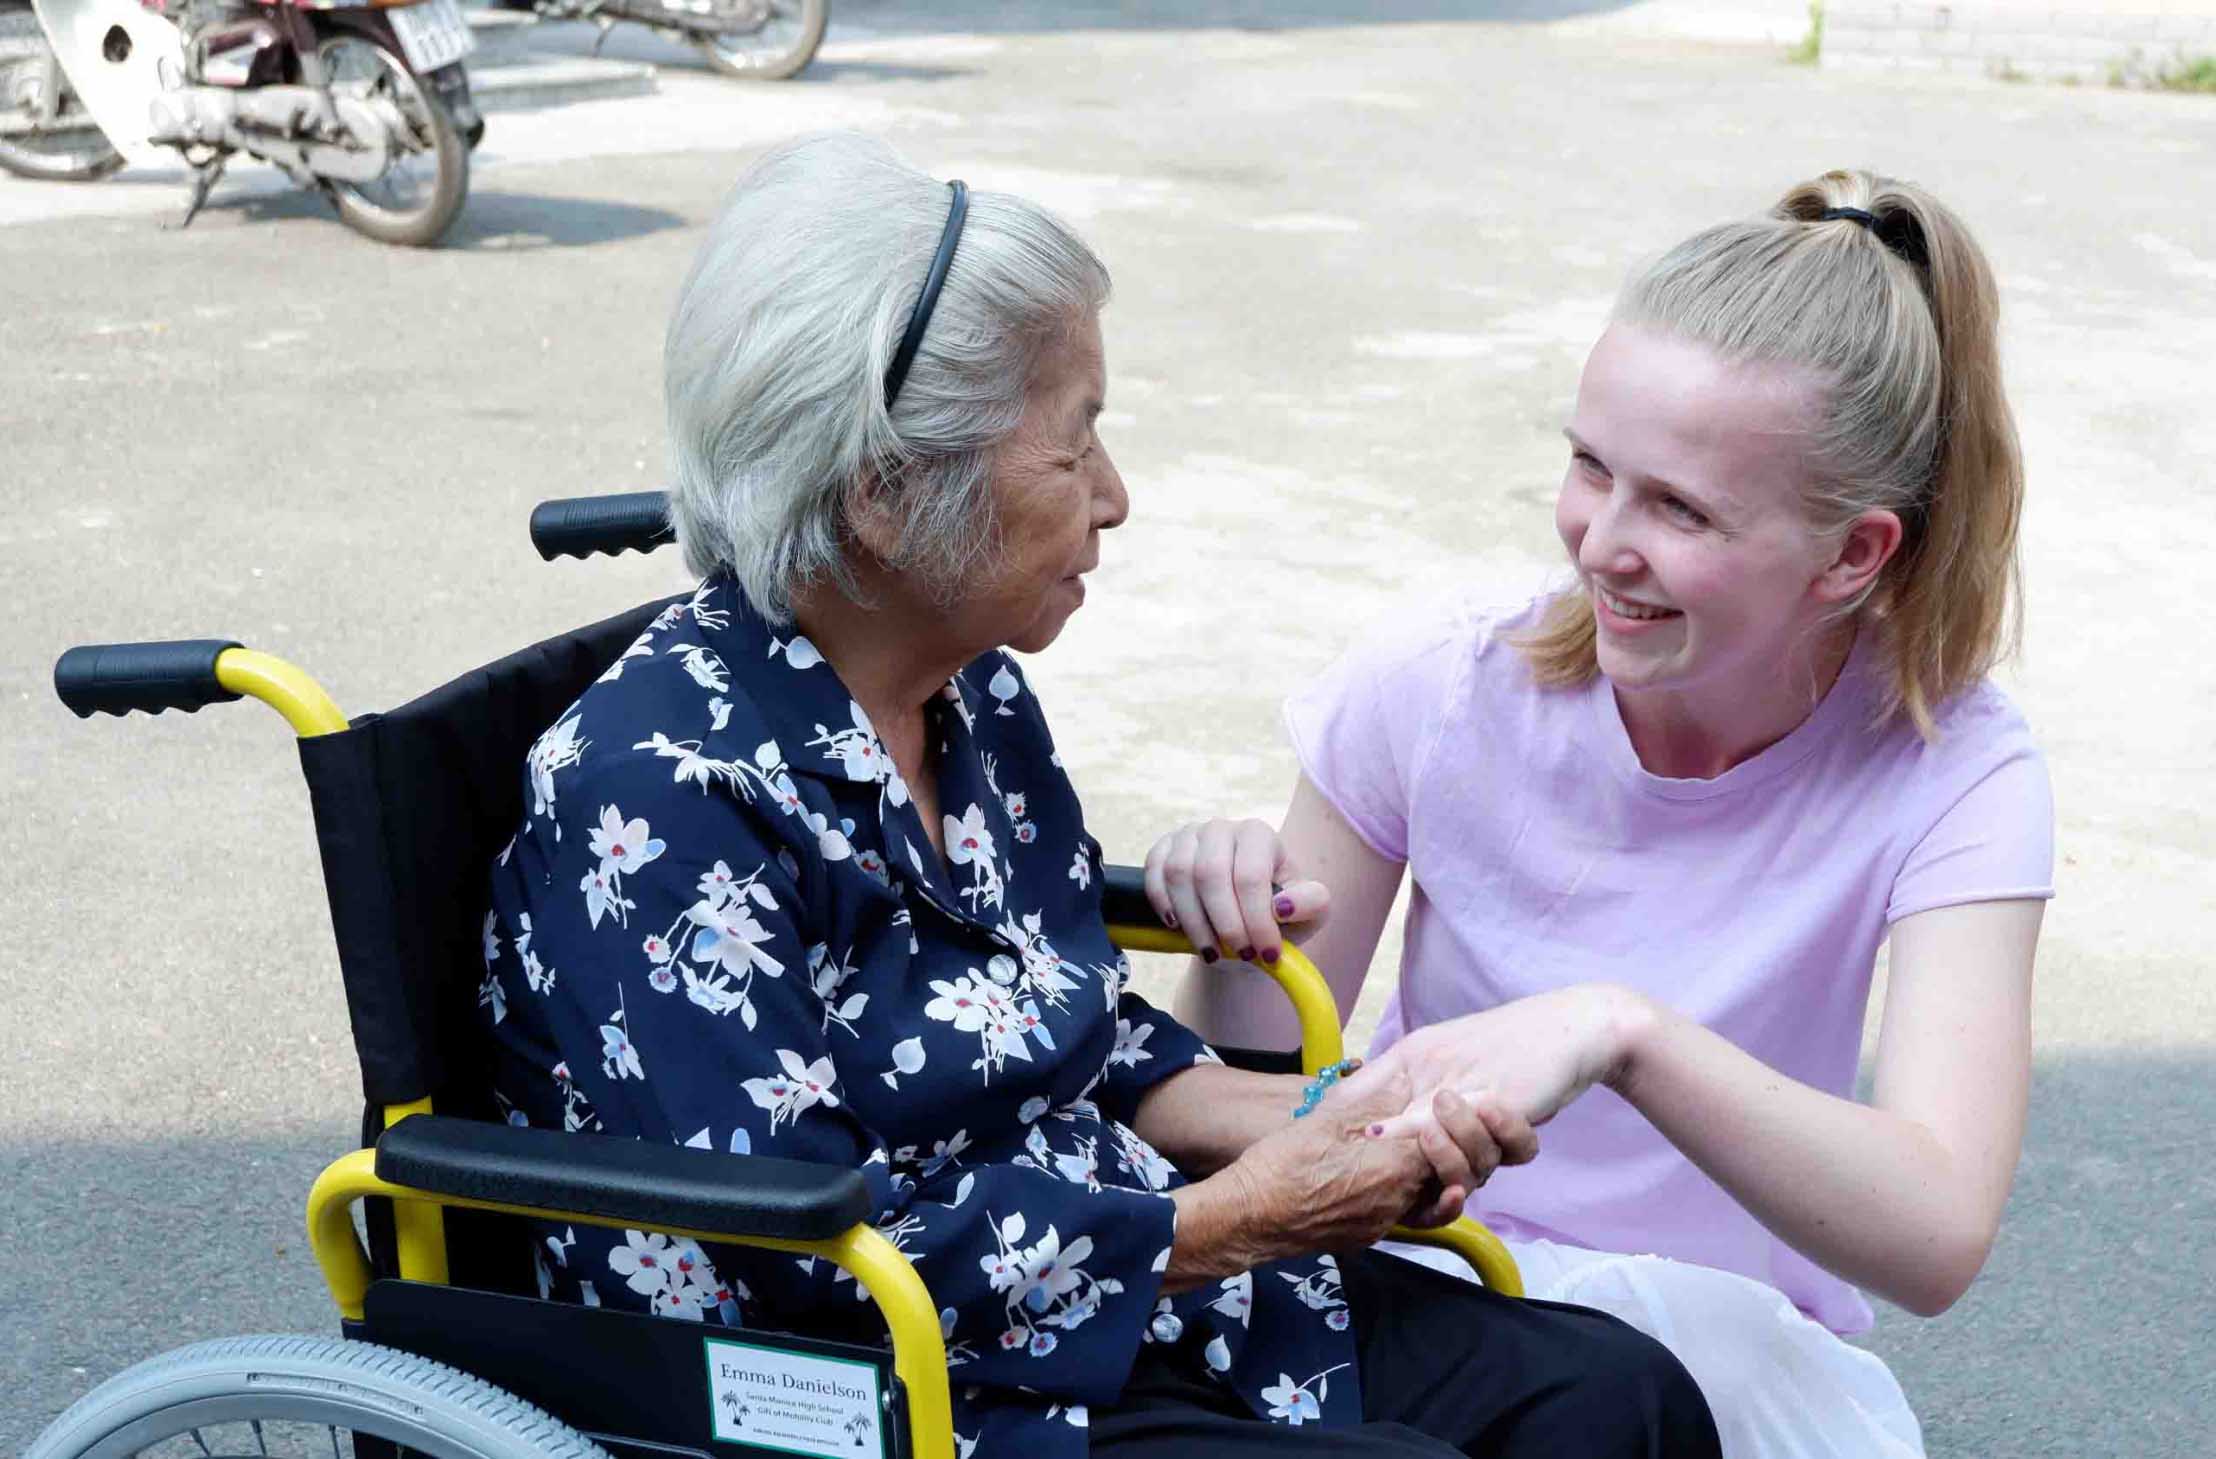 CARITAS-VIETNAM: TO DISTRIBUTE THE WHEELCHAIRS WITH LOVE